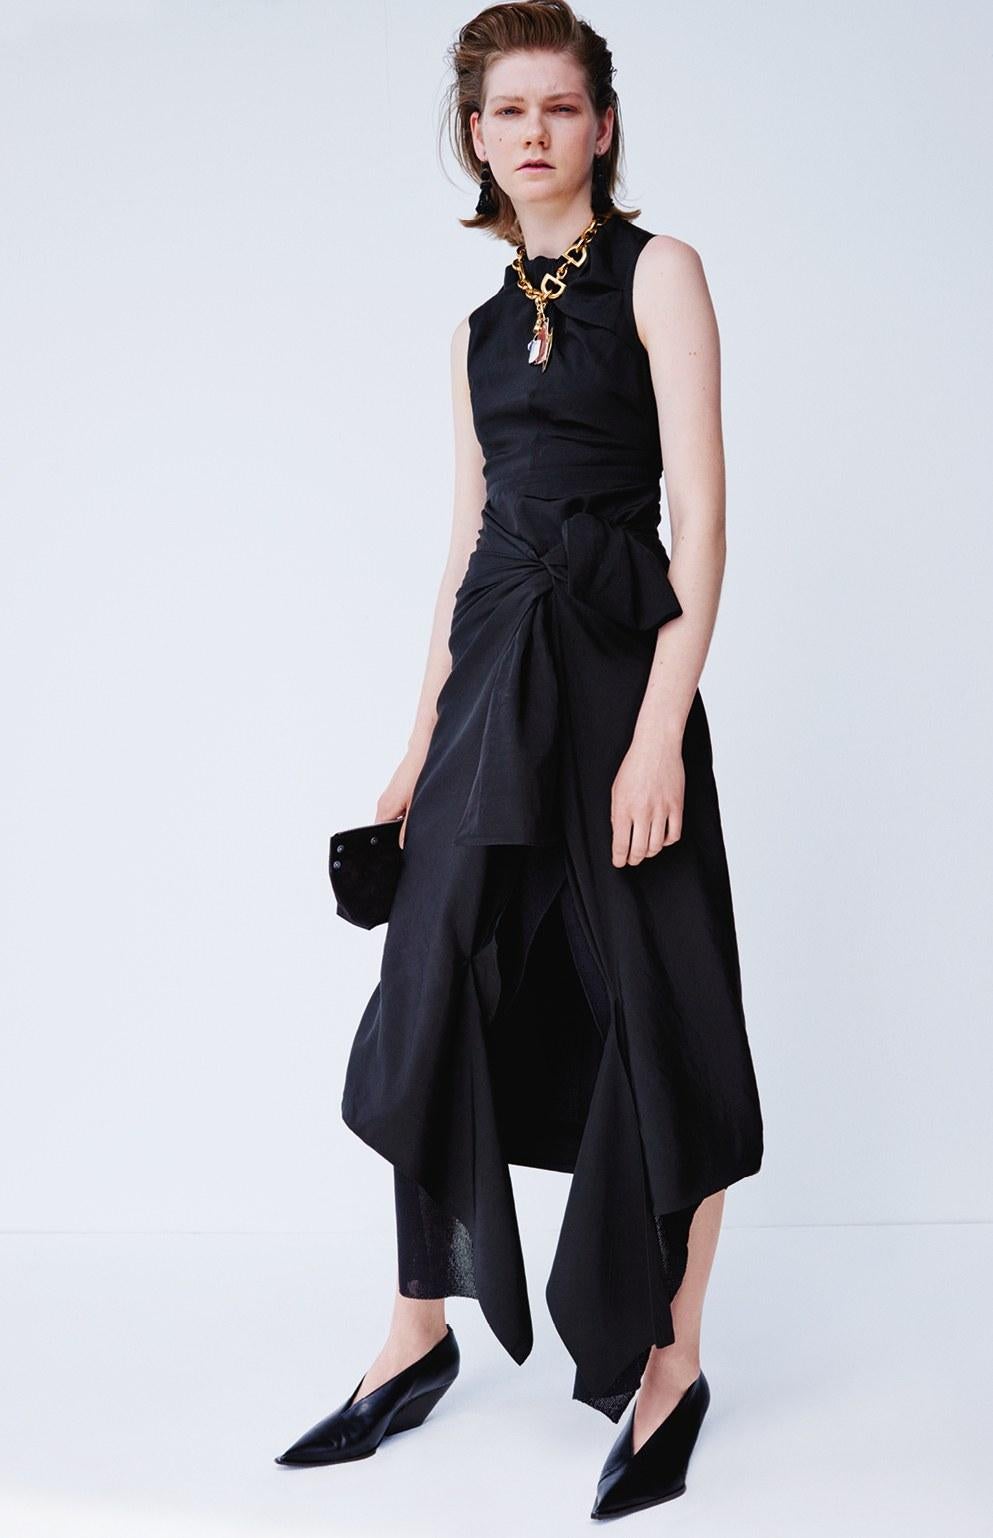 Celine By Phoebe Philo black dress with ties and cut out back  4